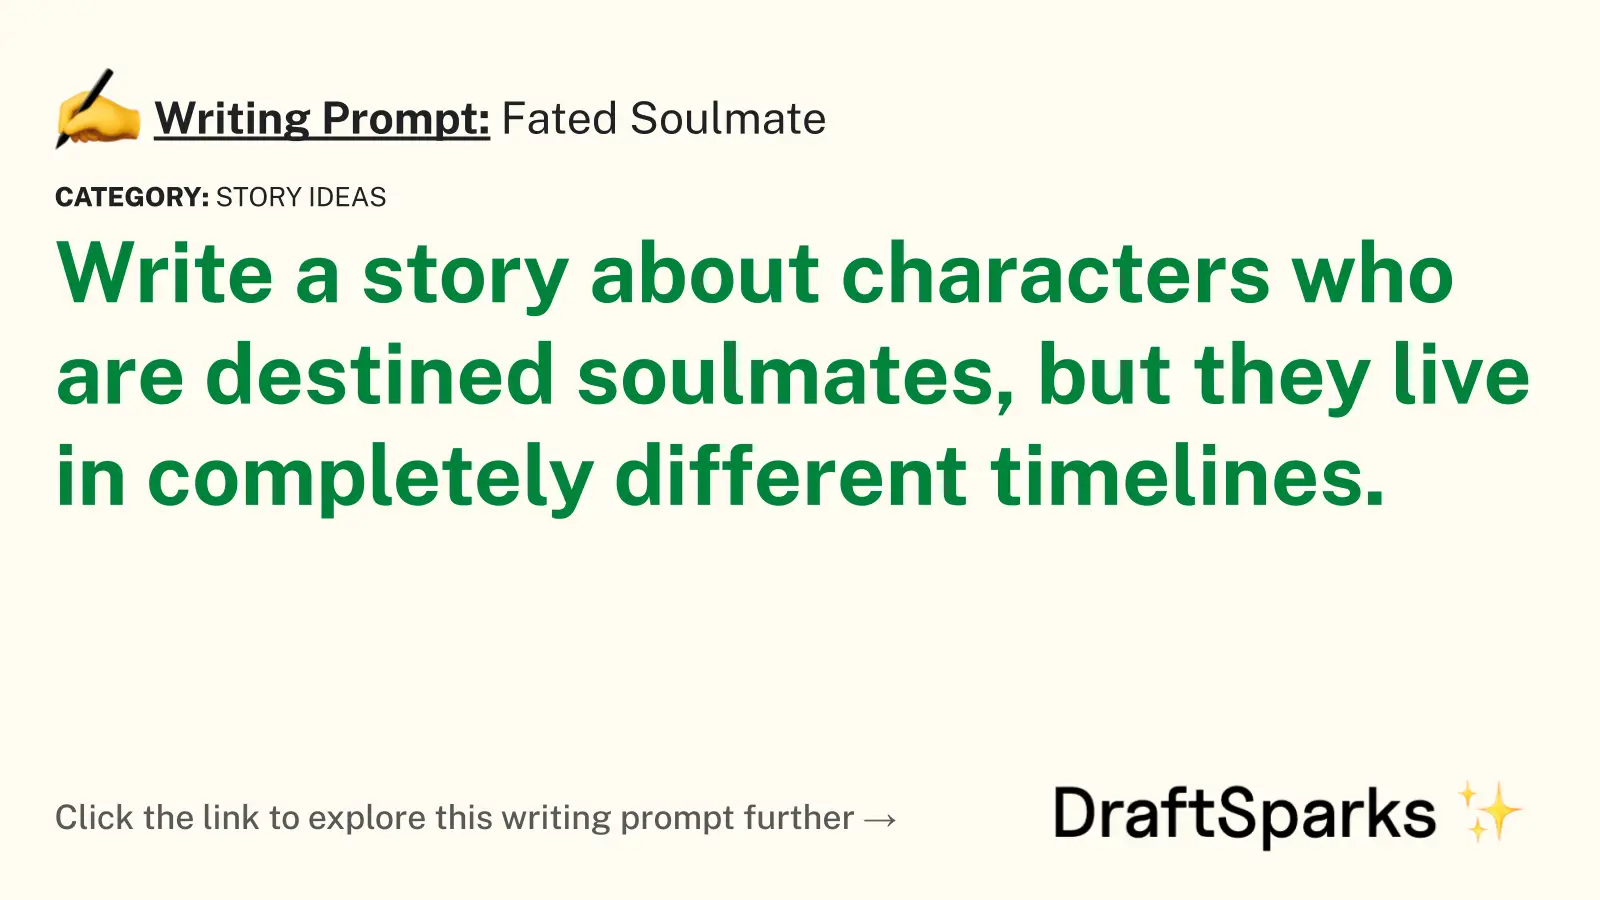 Fated Soulmate